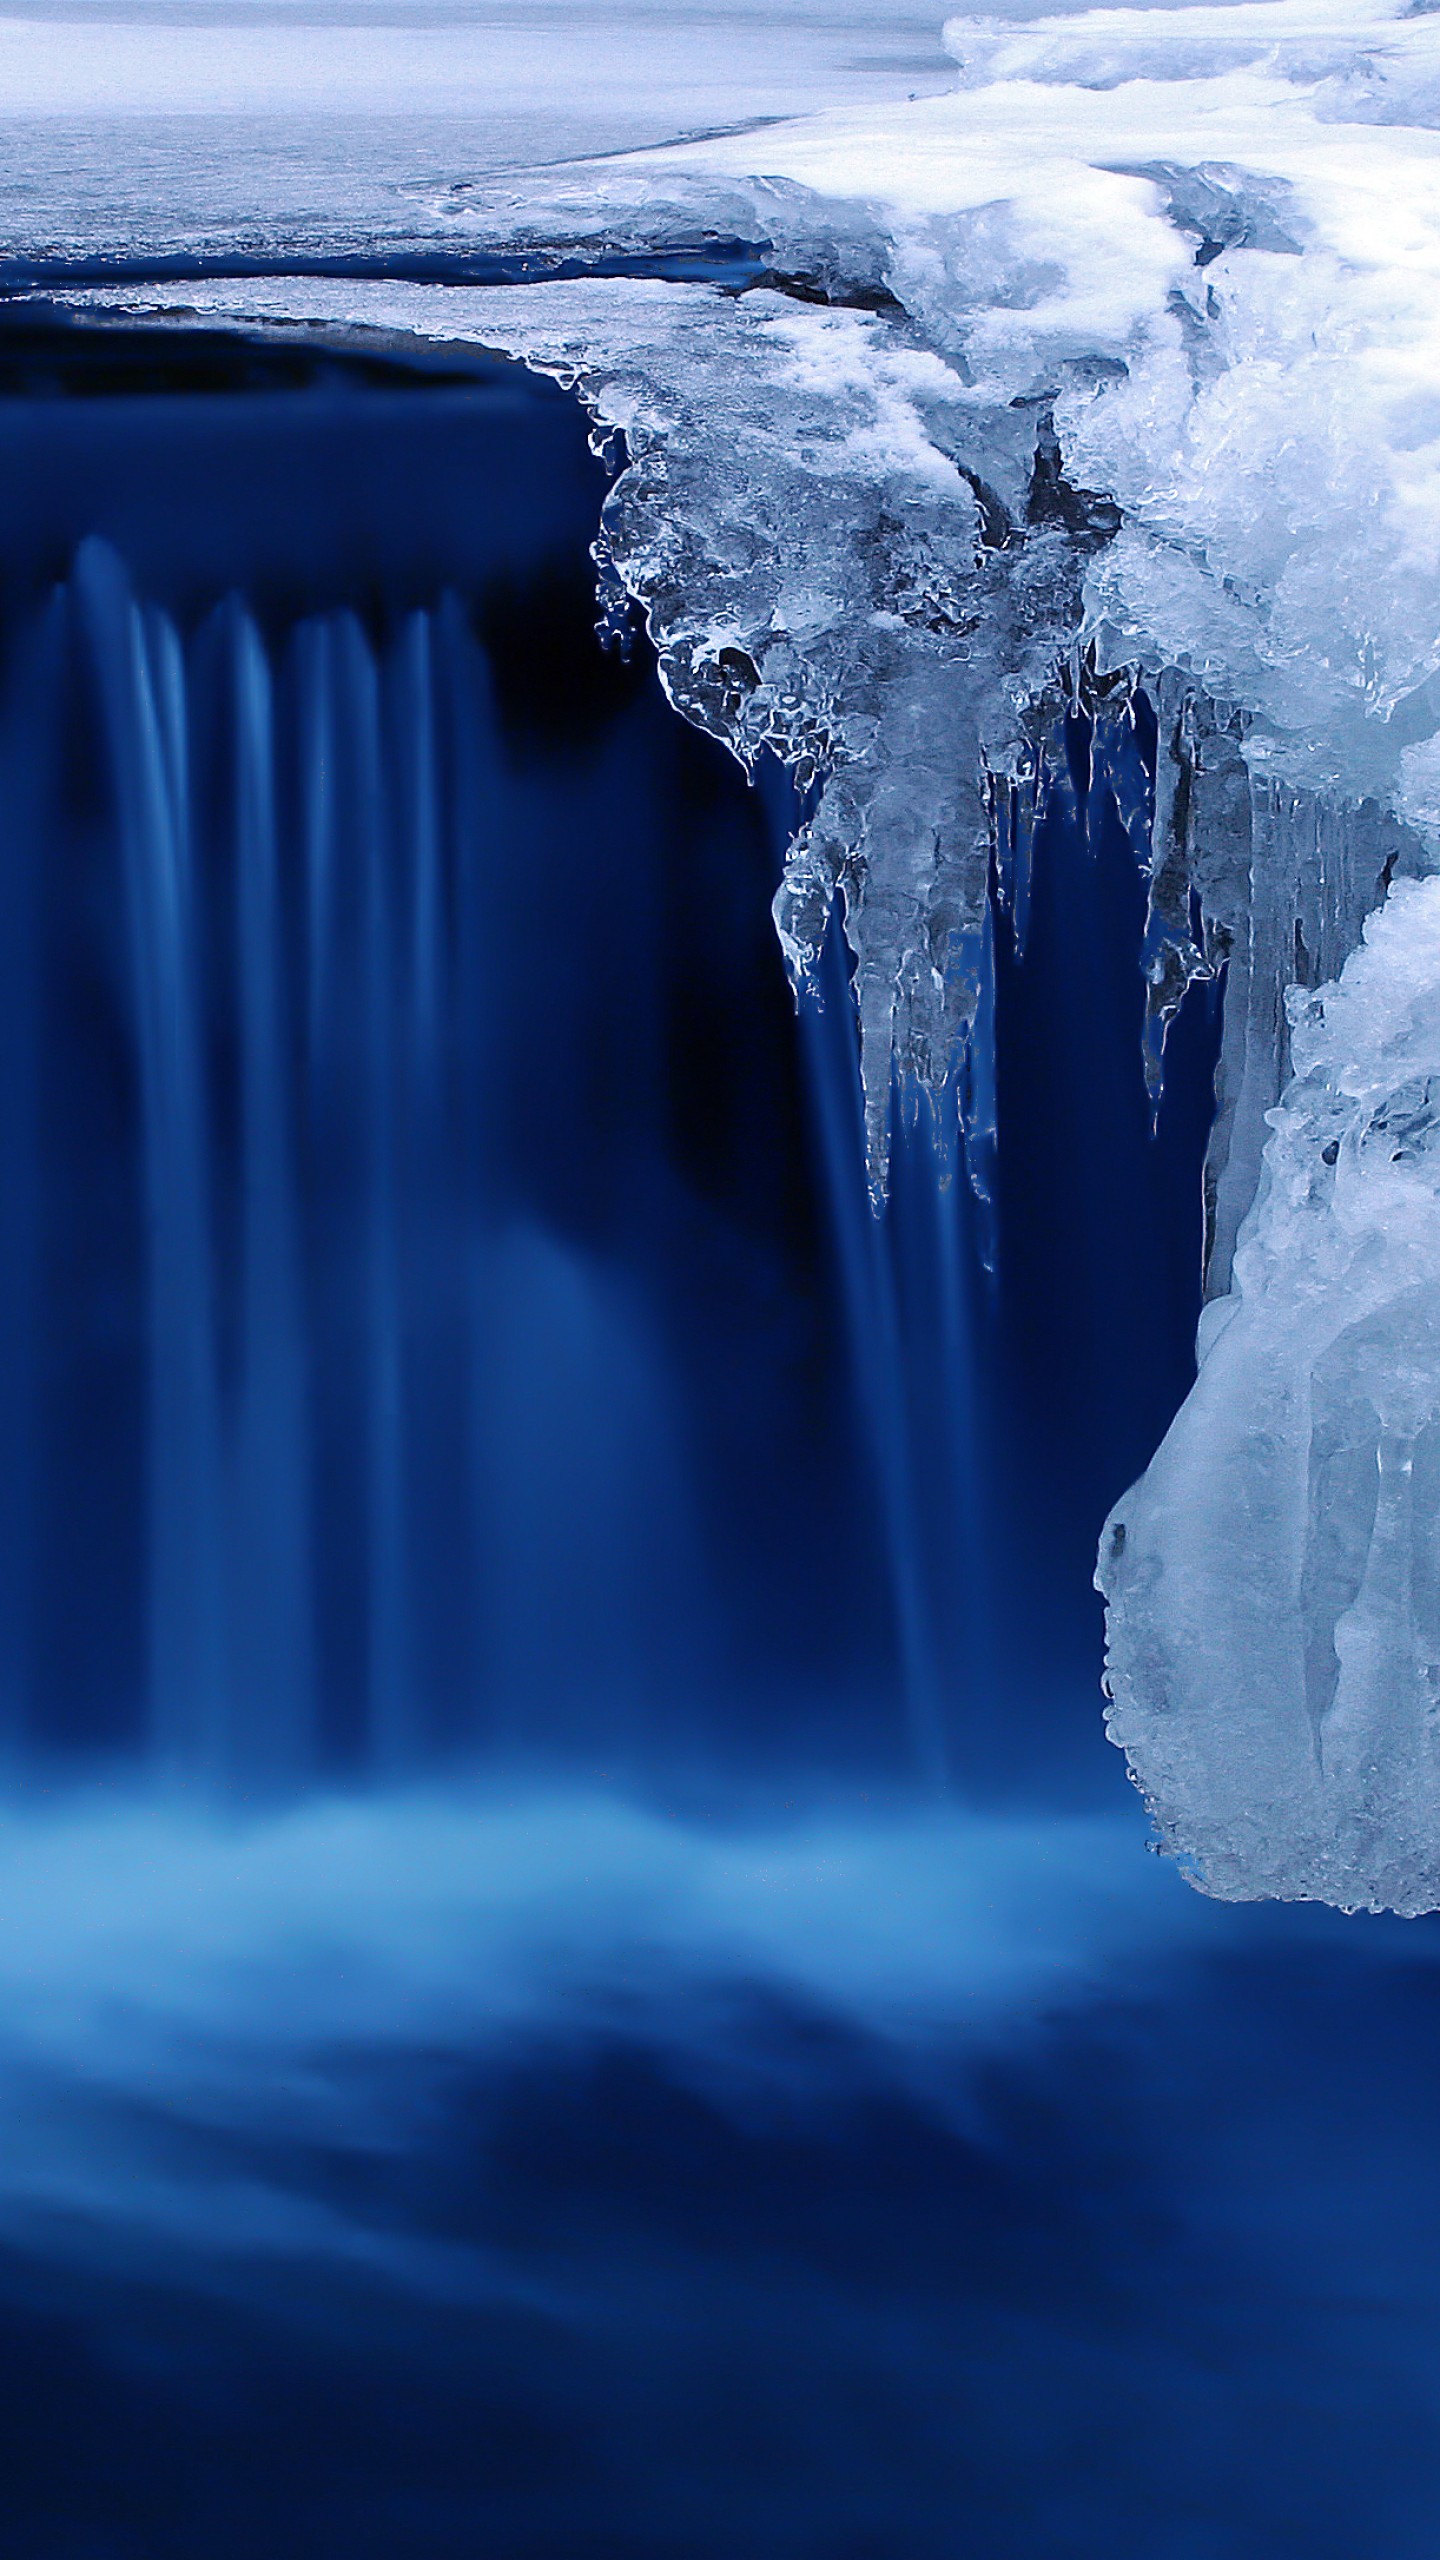 ice wallpaper,water resources,water,blue,natural landscape,nature